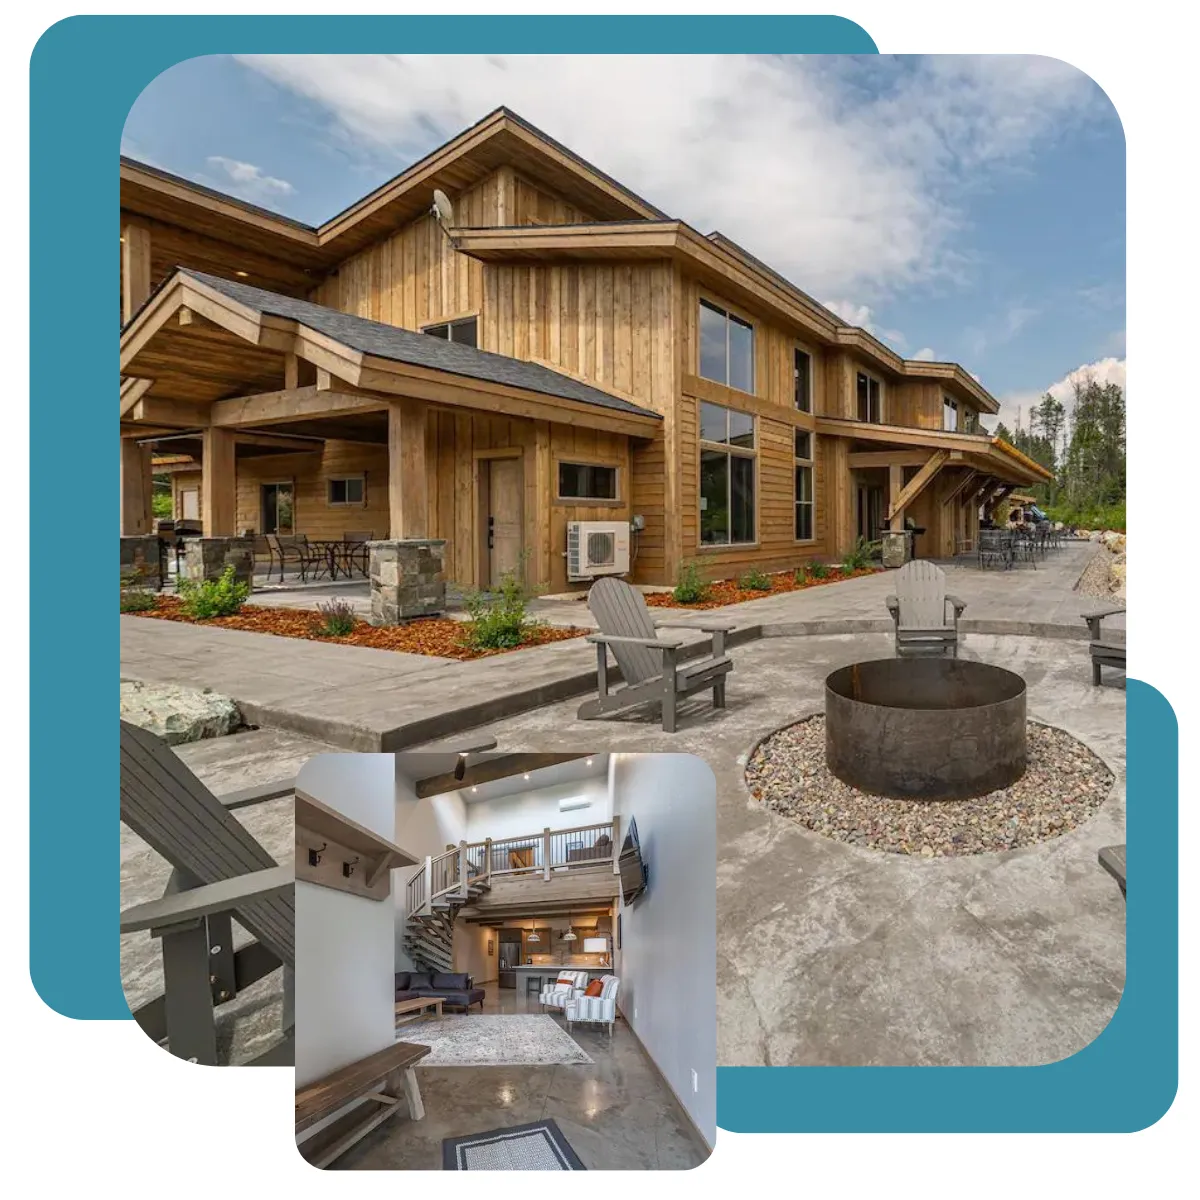 Experience the luxury of "The Spirit of Glacier" condo surrounded by nature, providing comfort and adventure for your family near Glacier National Park. With top-notch amenities and easy access from Glacier International Airport, create cherished memories in this remarkable landscape.